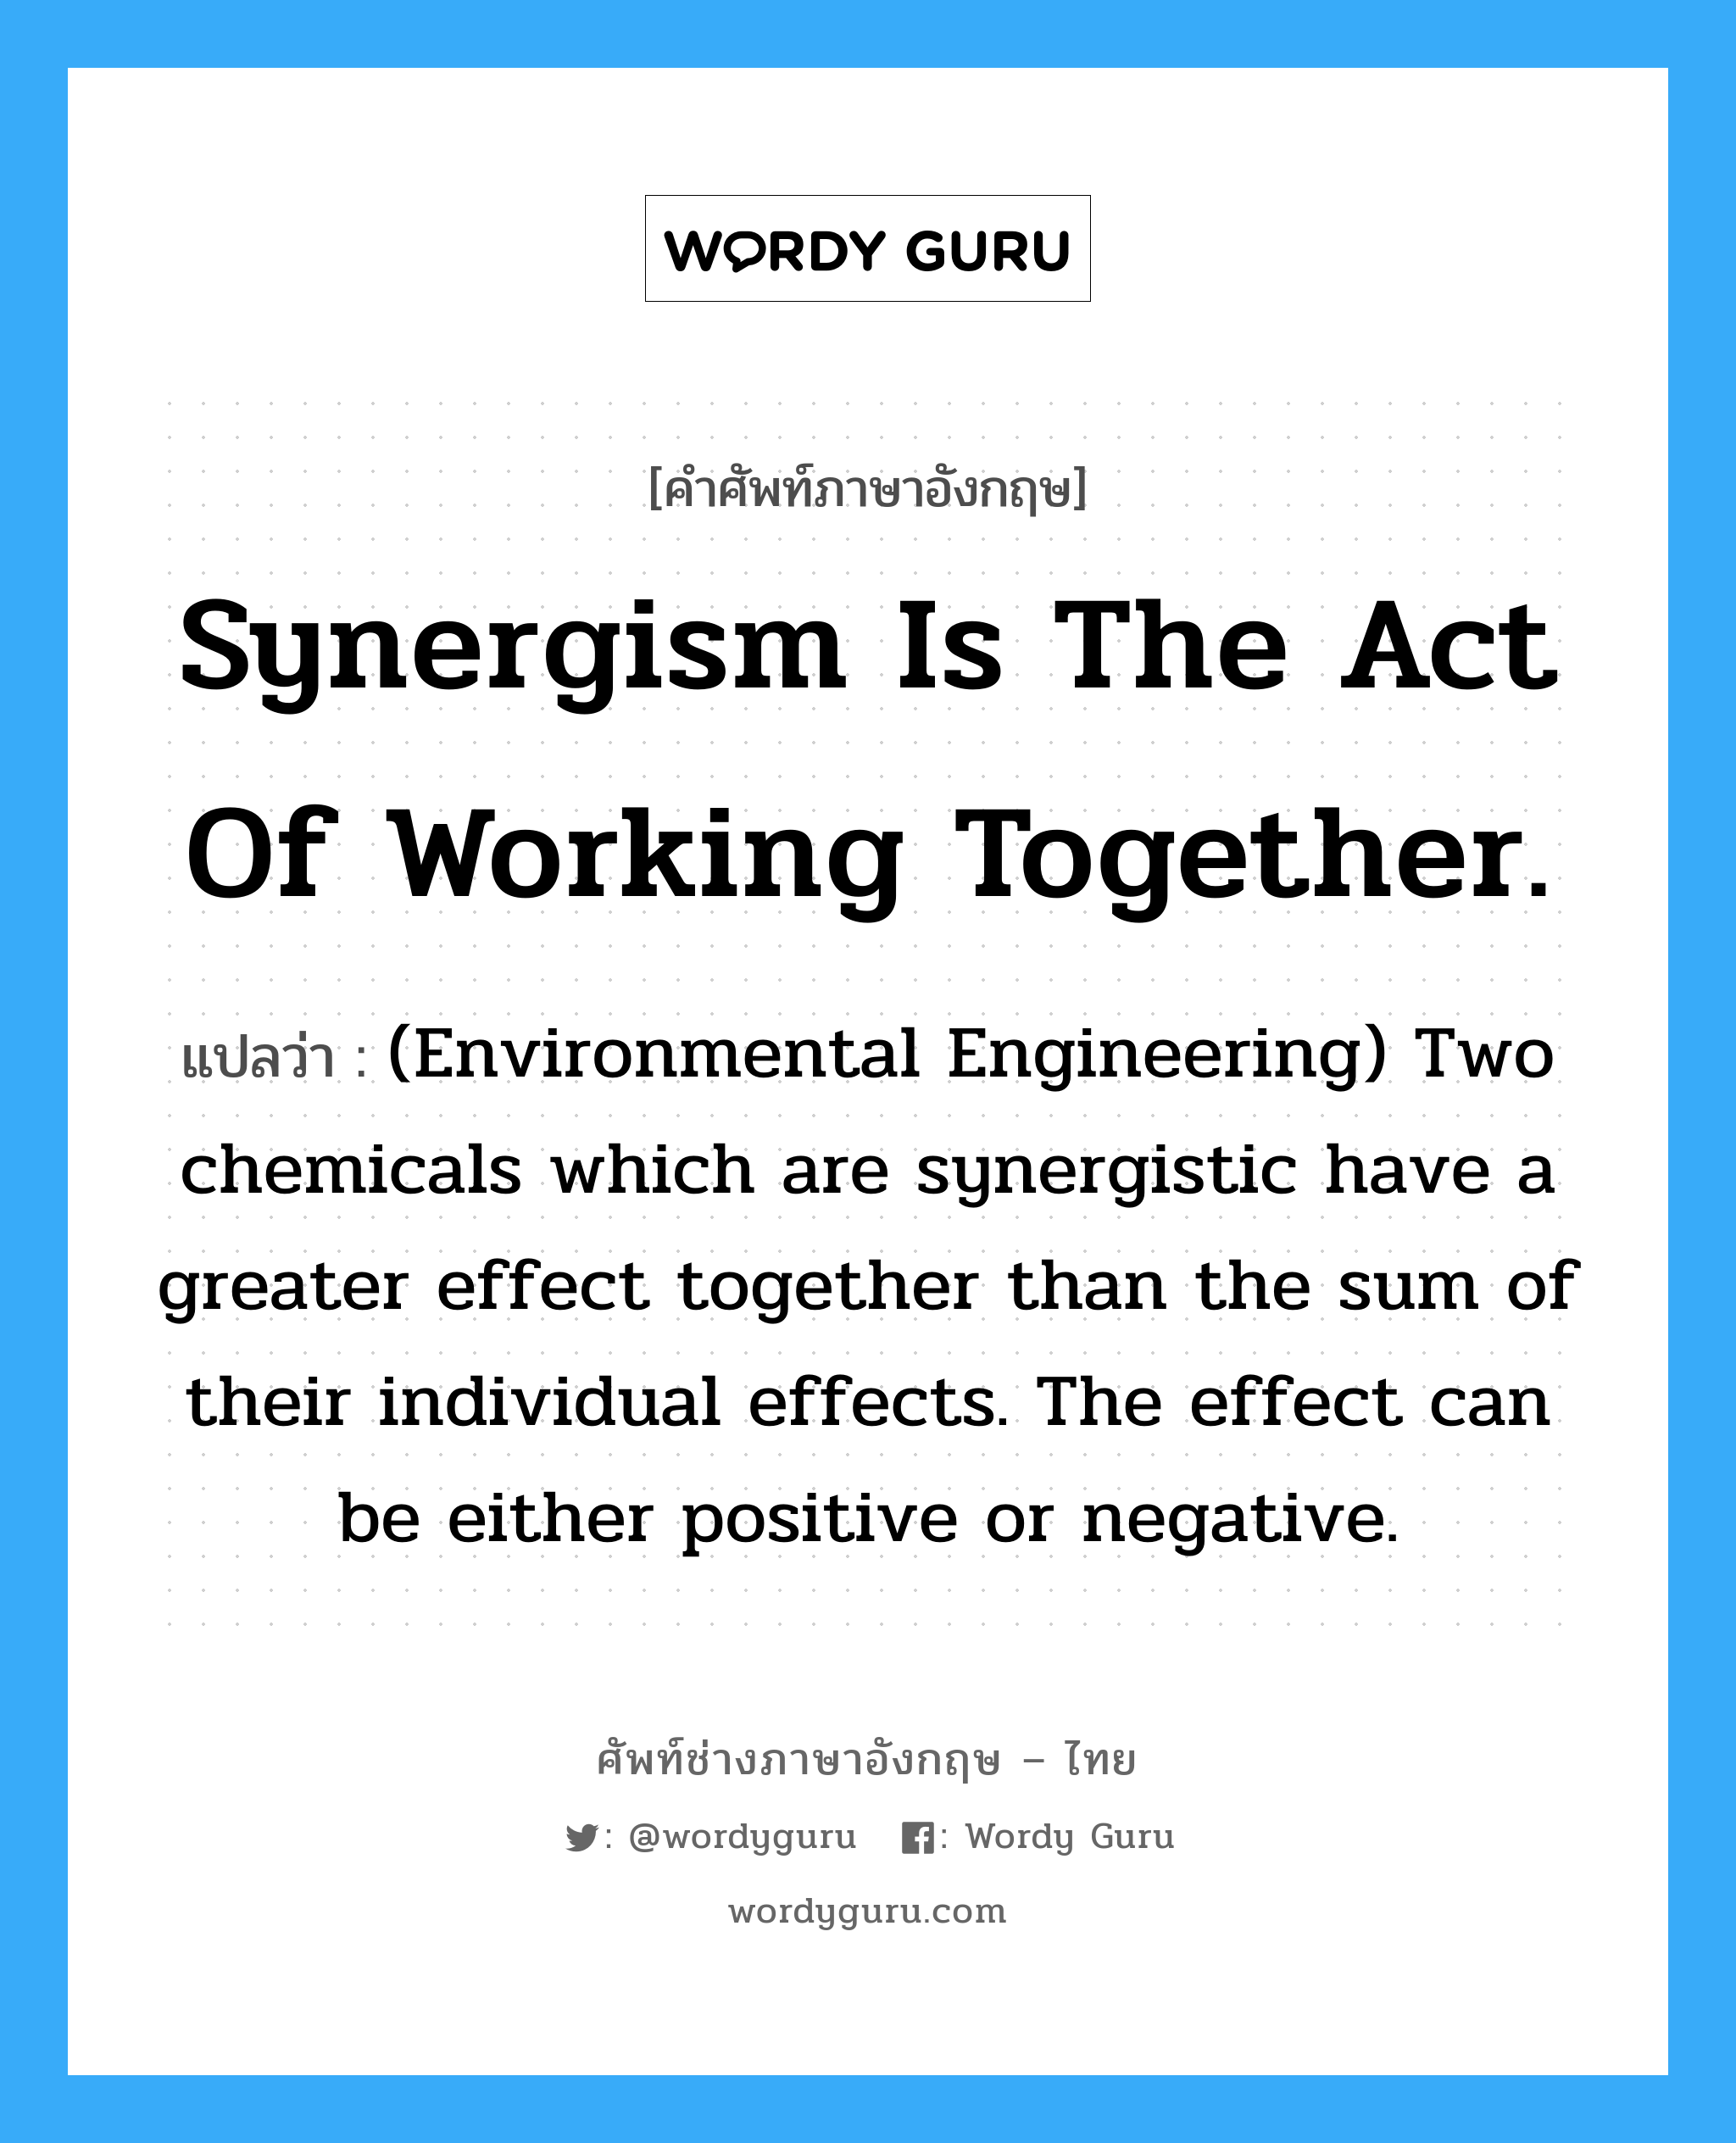 Synergism is the act of working together. แปลว่า?, คำศัพท์ช่างภาษาอังกฤษ - ไทย Synergism is the act of working together. คำศัพท์ภาษาอังกฤษ Synergism is the act of working together. แปลว่า (Environmental Engineering) Two chemicals which are synergistic have a greater effect together than the sum of their individual effects. The effect can be either positive or negative.